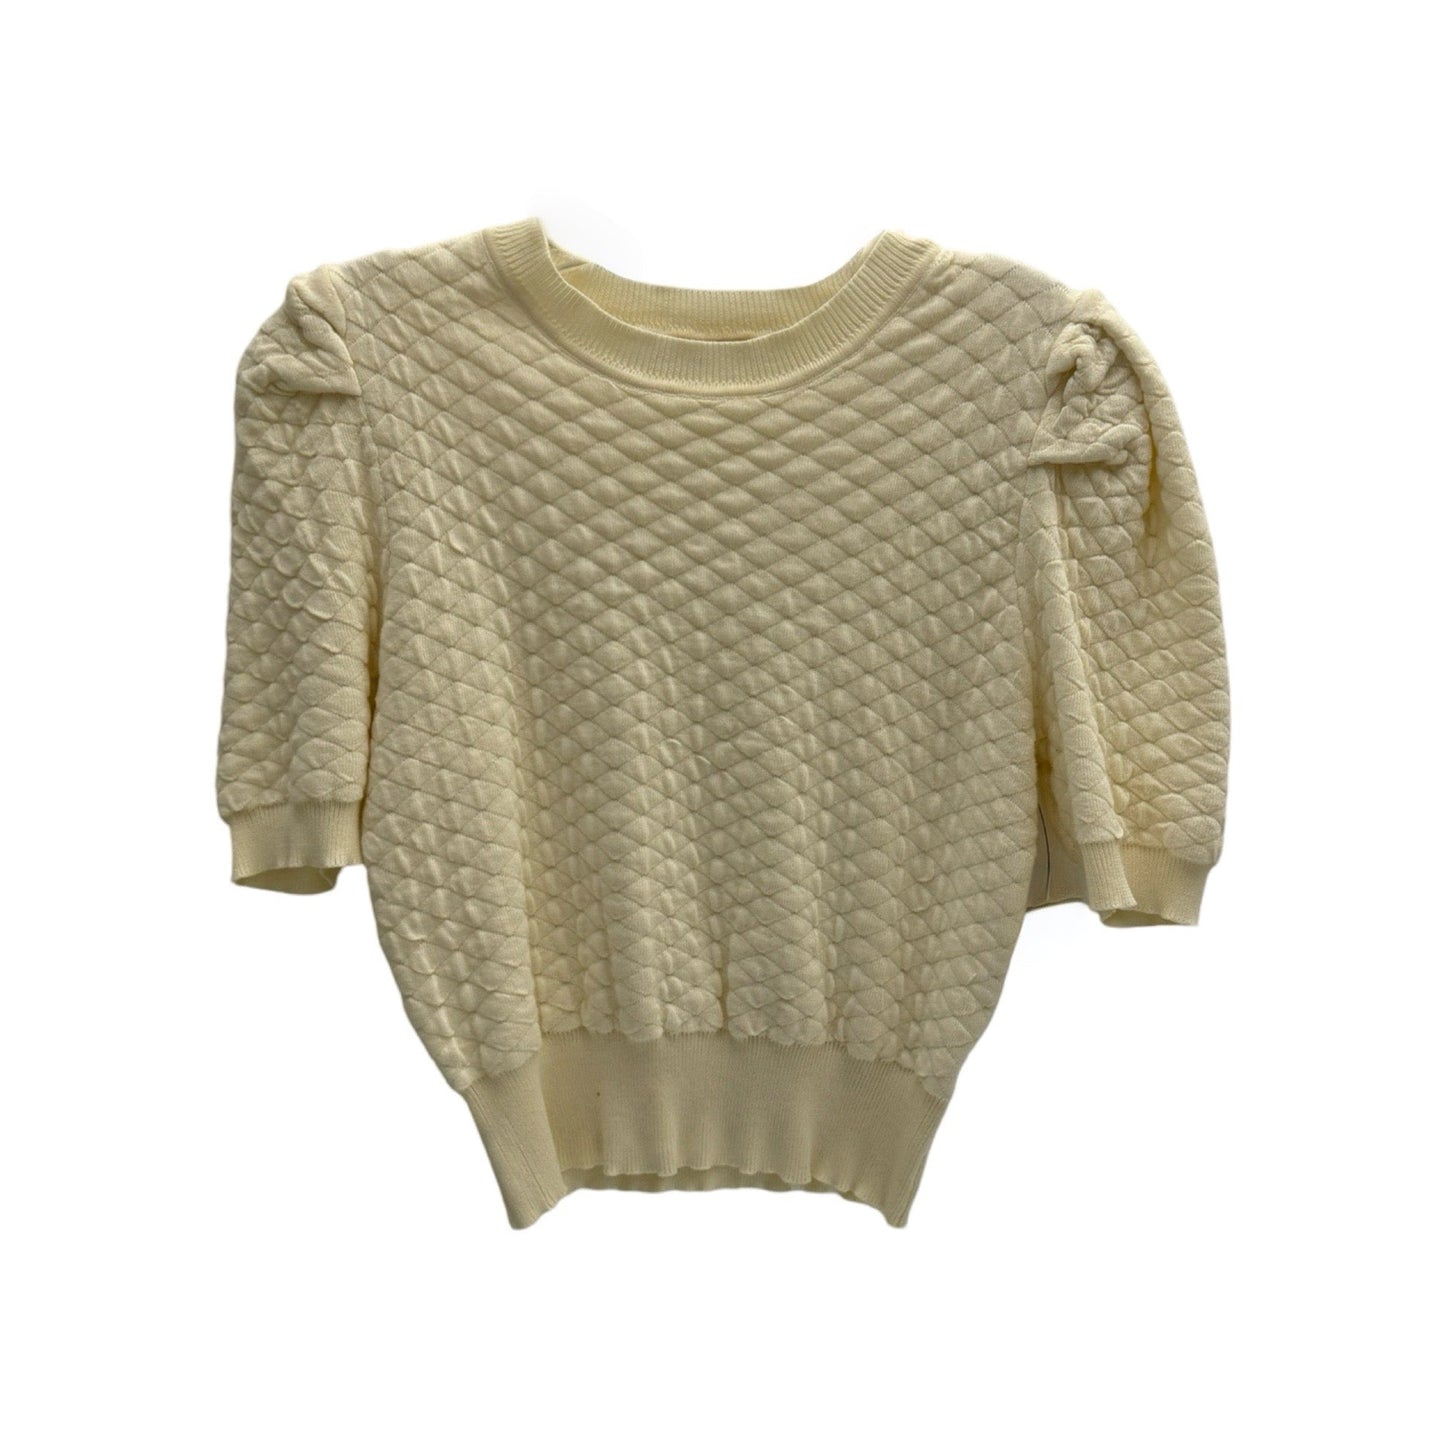 Yellow Top Short Sleeve Knit Mix, Size S